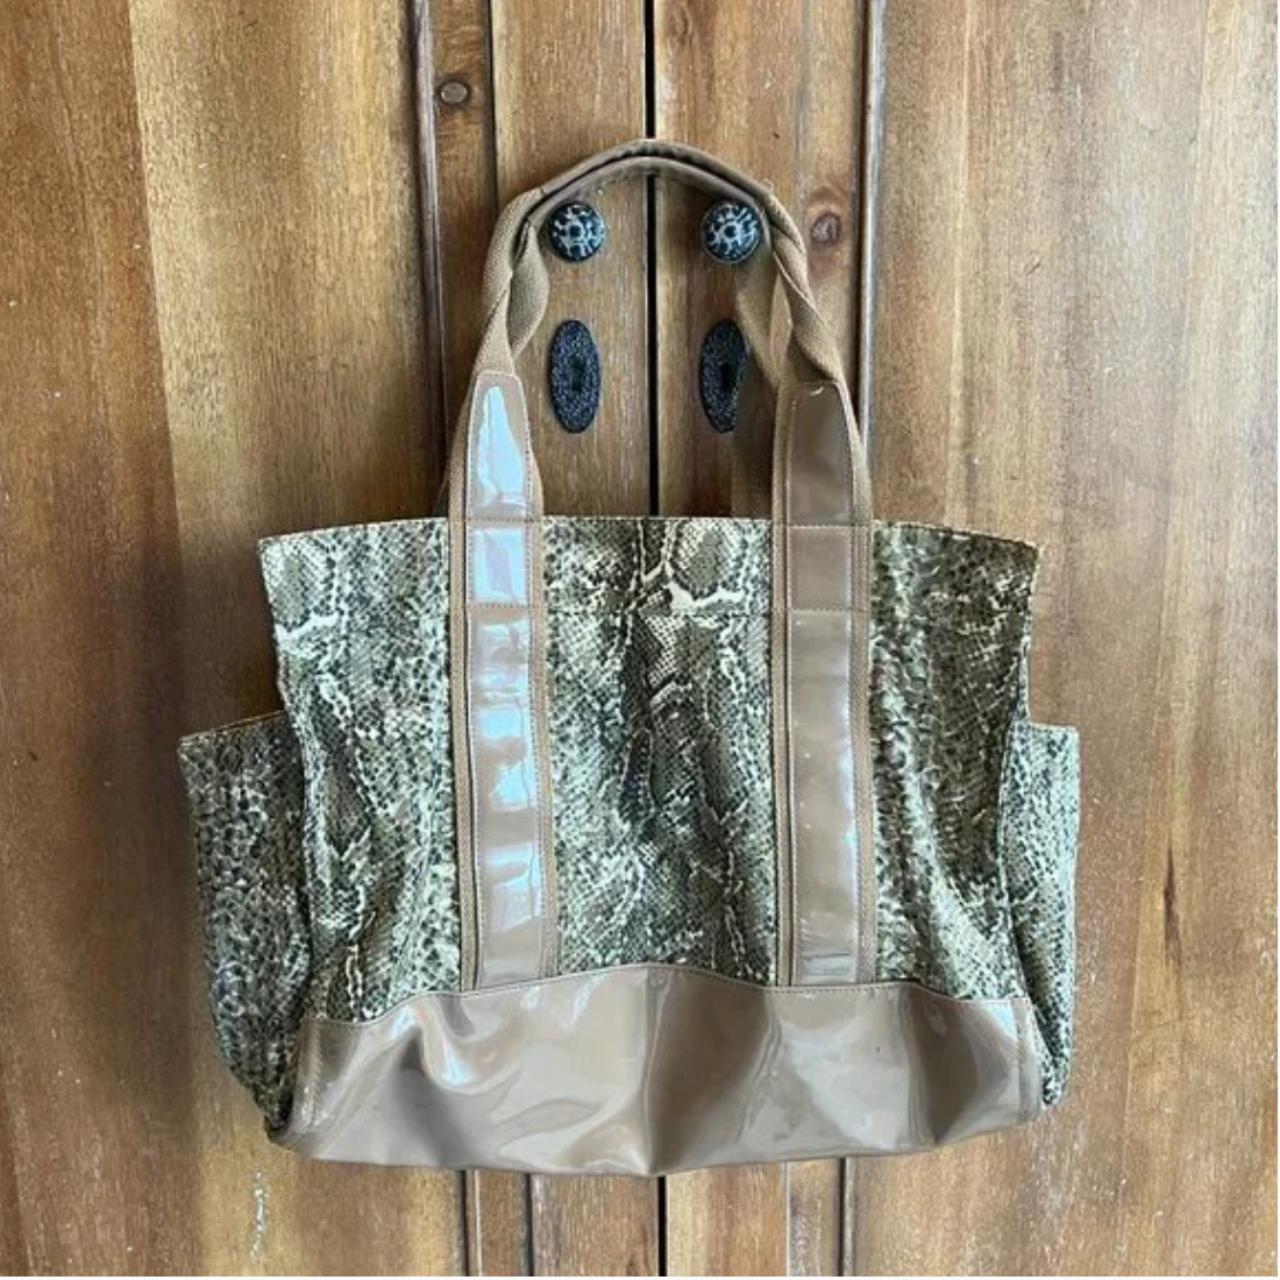 TORY BURCH GREEN TOTE never used brand new - Depop